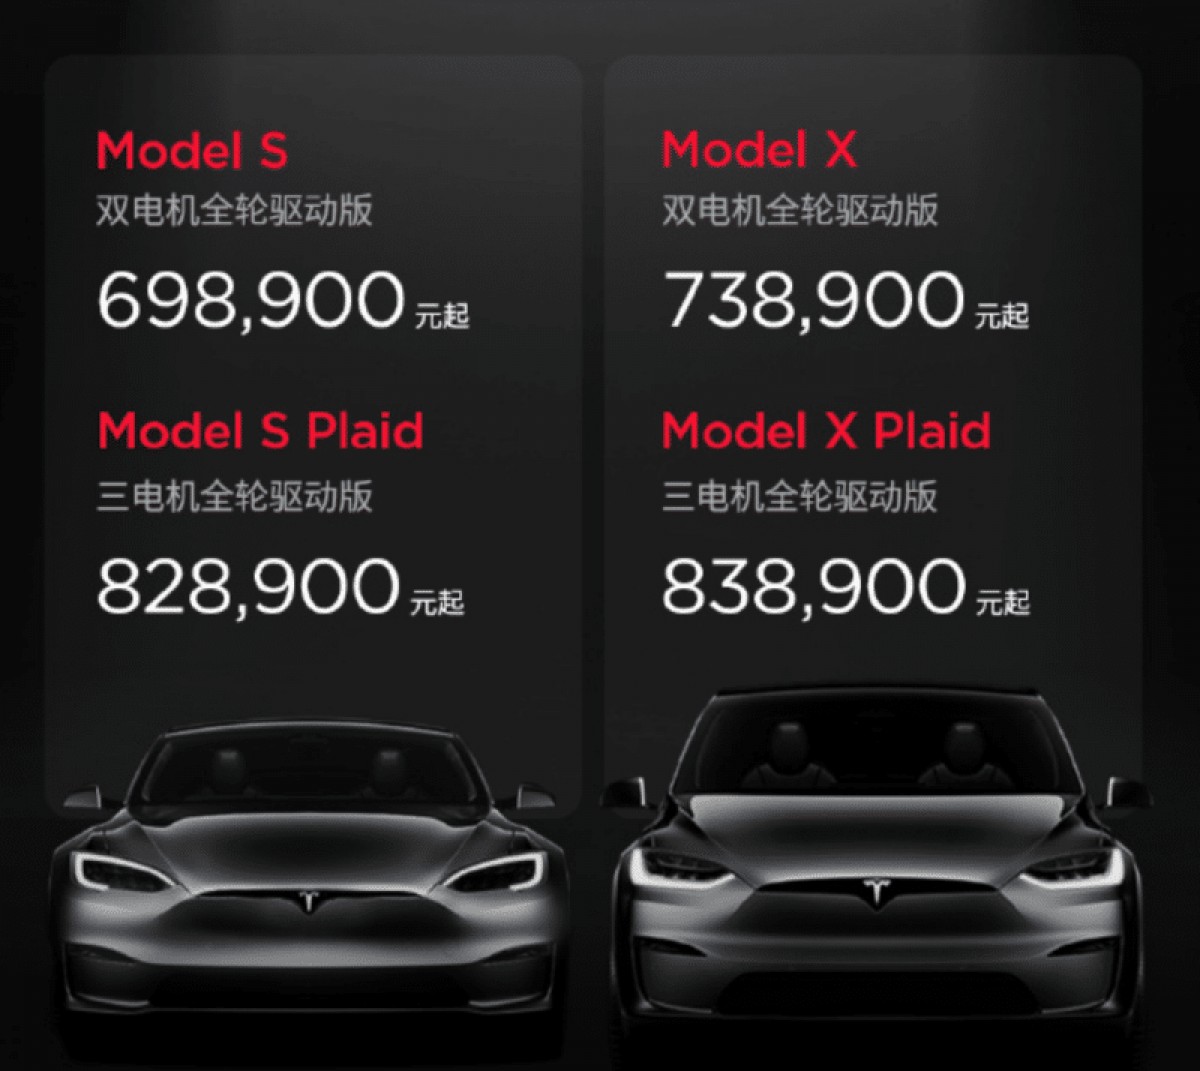 Tesla’s New Model 3 goes on sale in China